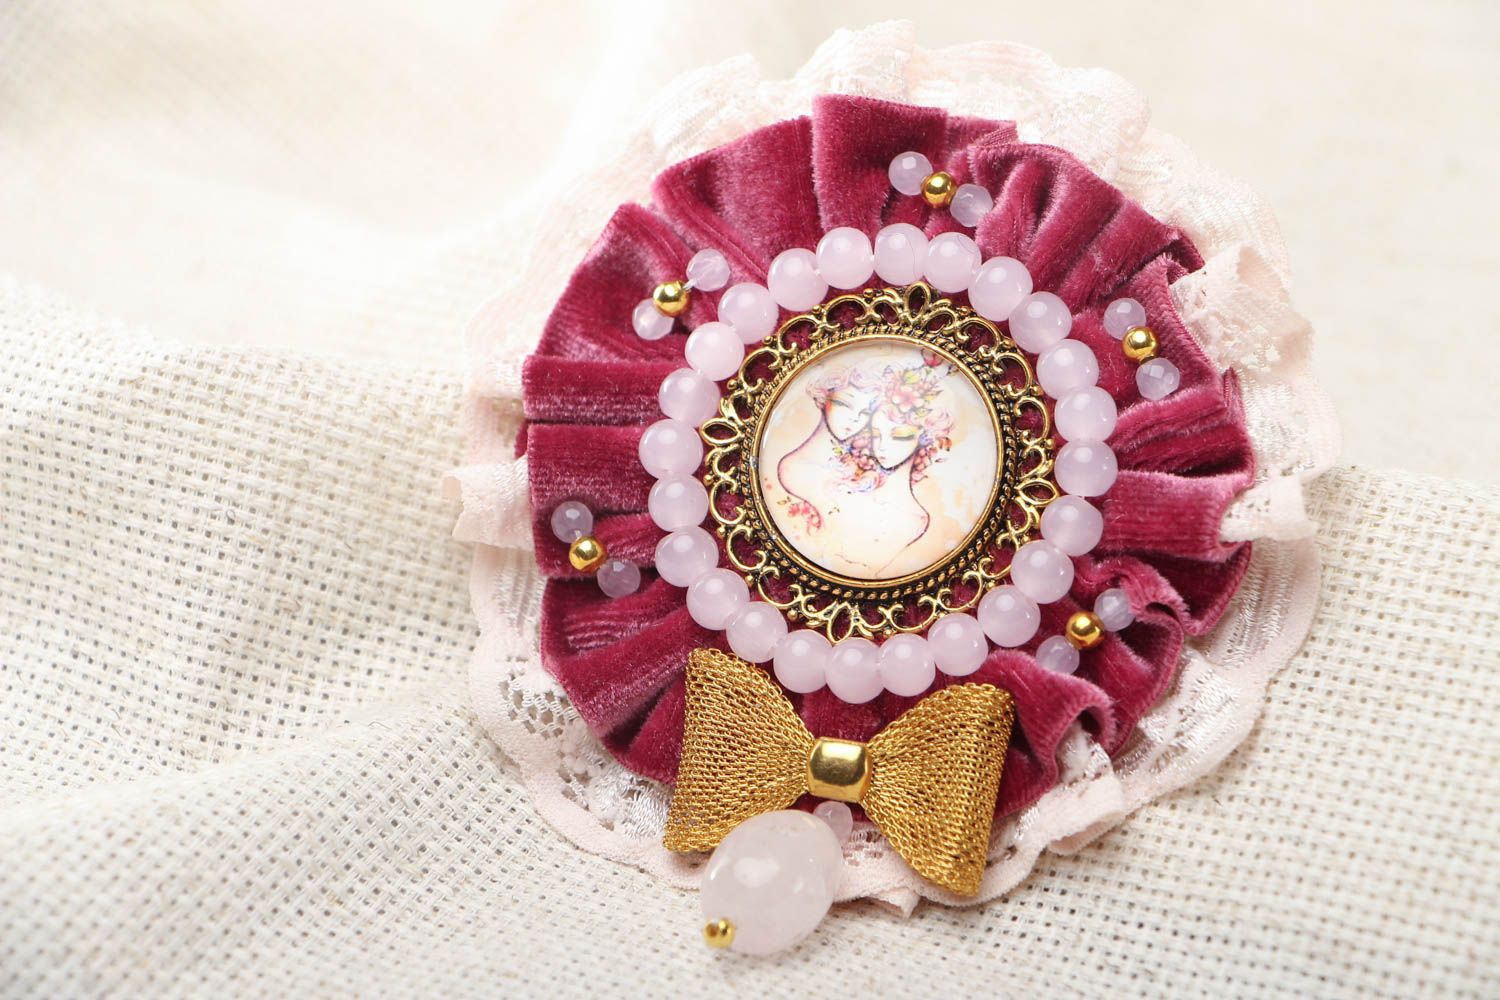 Vintage brooch with cameo photo 1